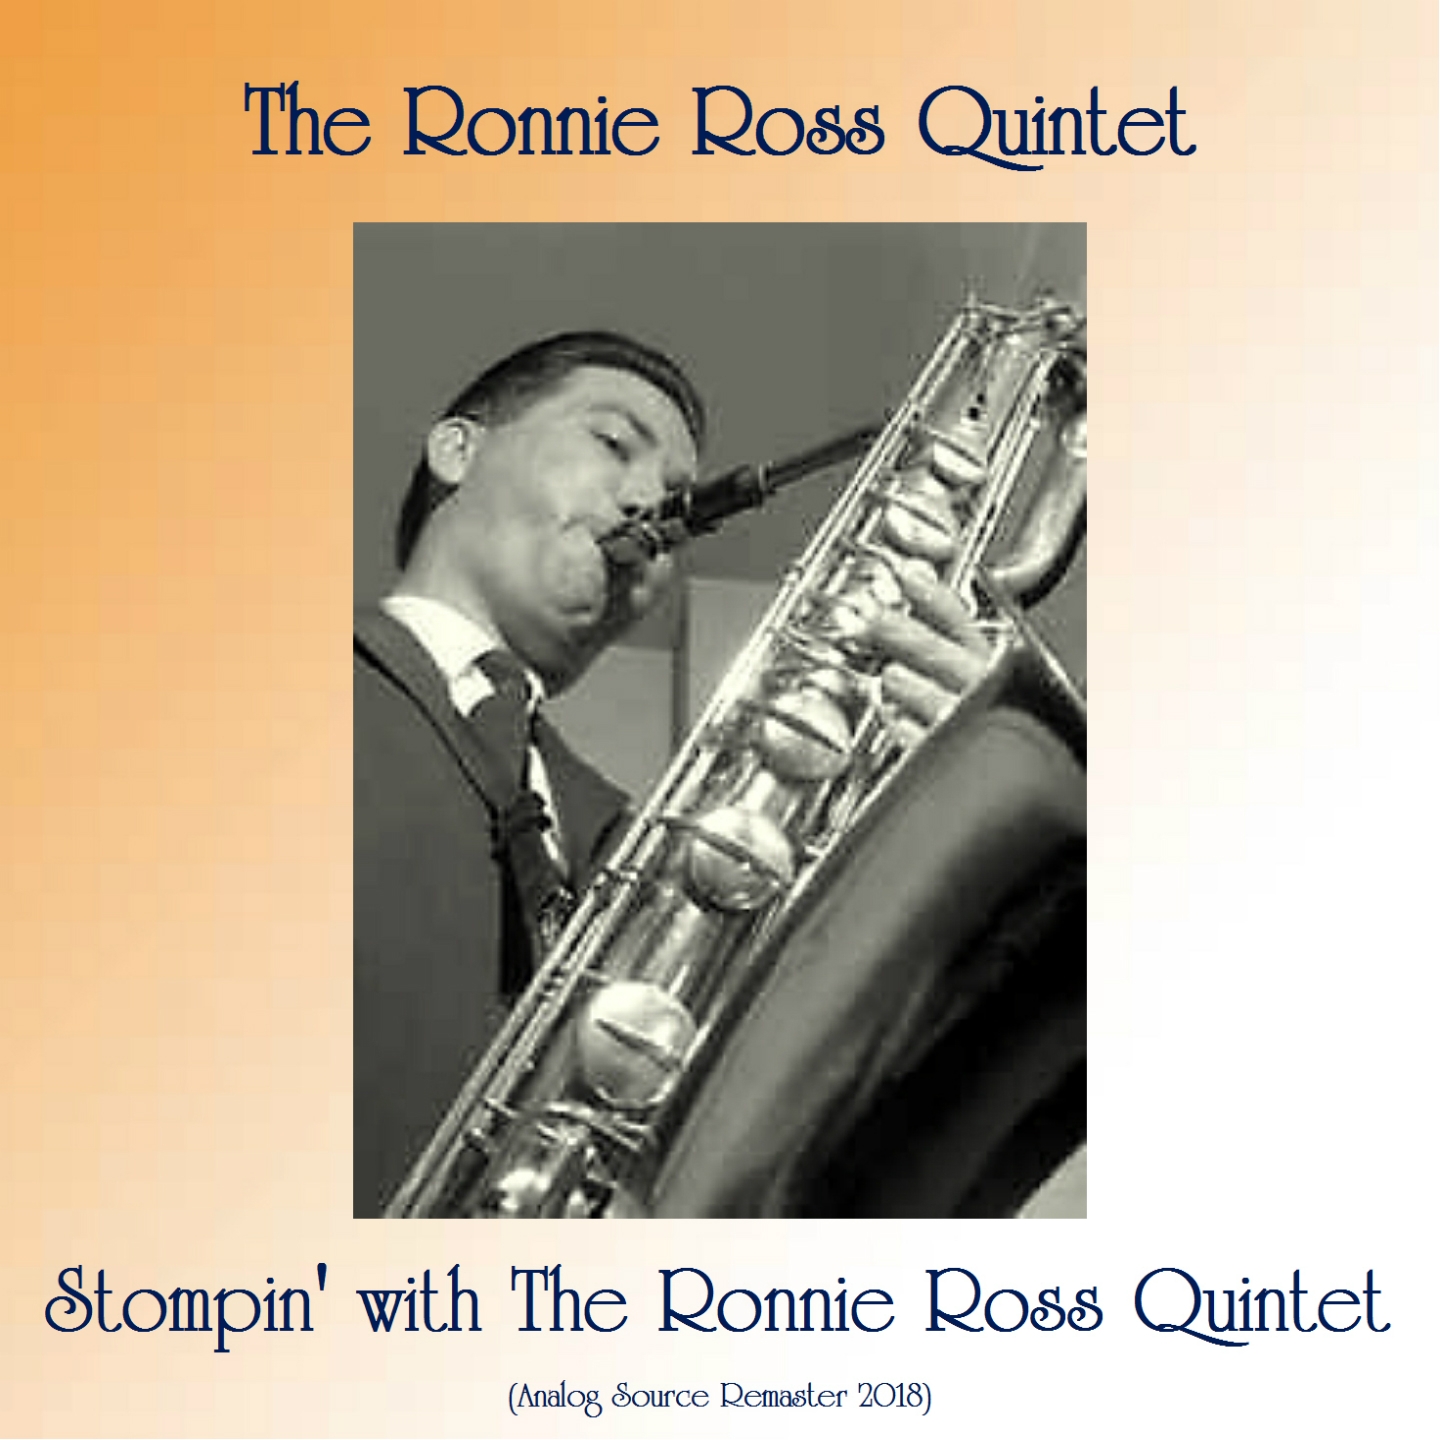 Stompin' with the Ronnie Ross Quintet (Analog Source Remaster 2018)